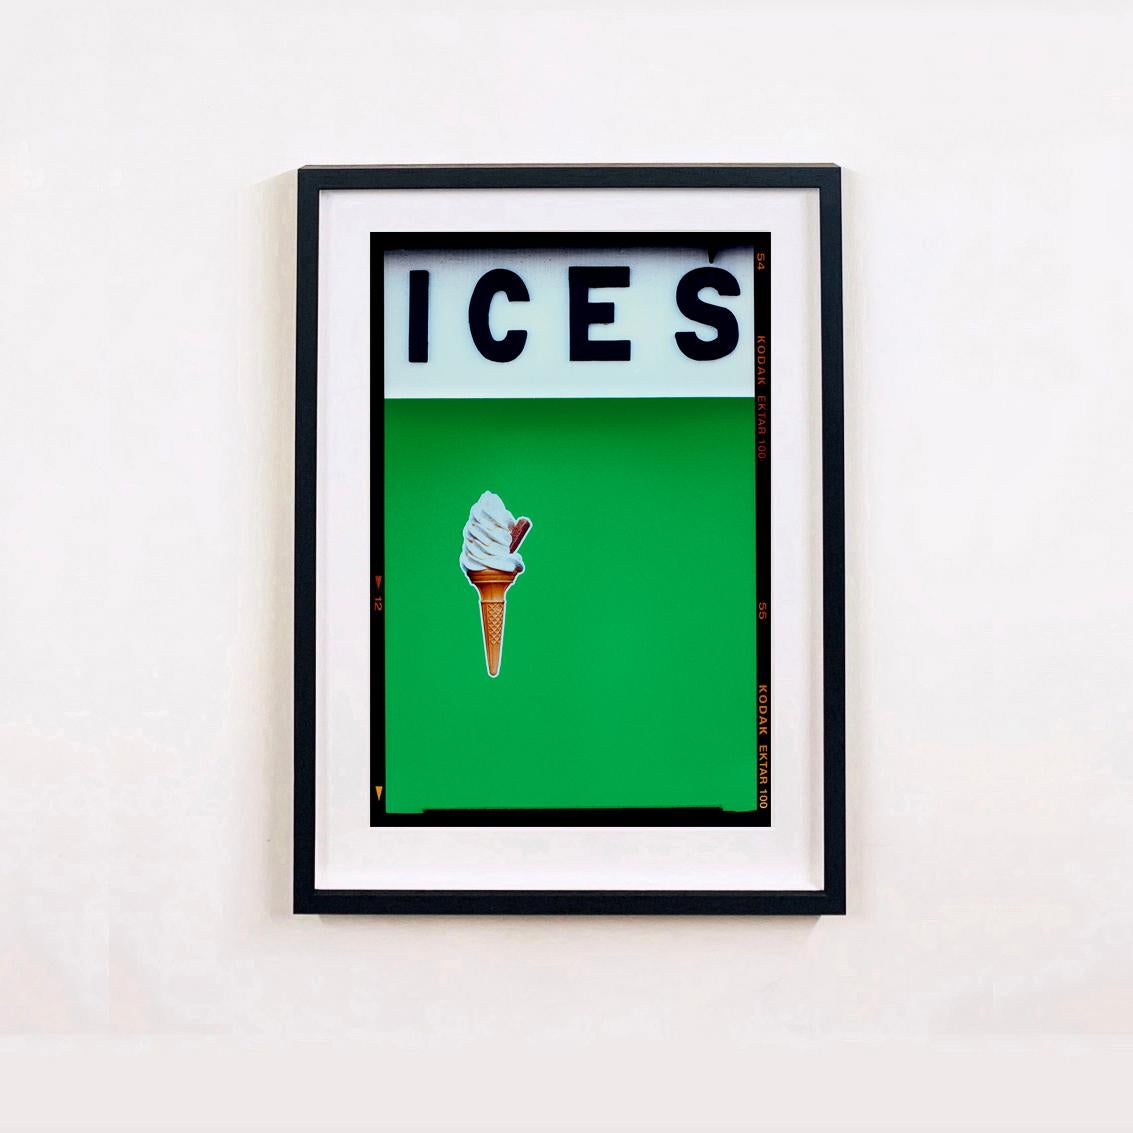 Ices (Green), Bexhill-on-Sea - British seaside color photography - Photograph by Richard Heeps